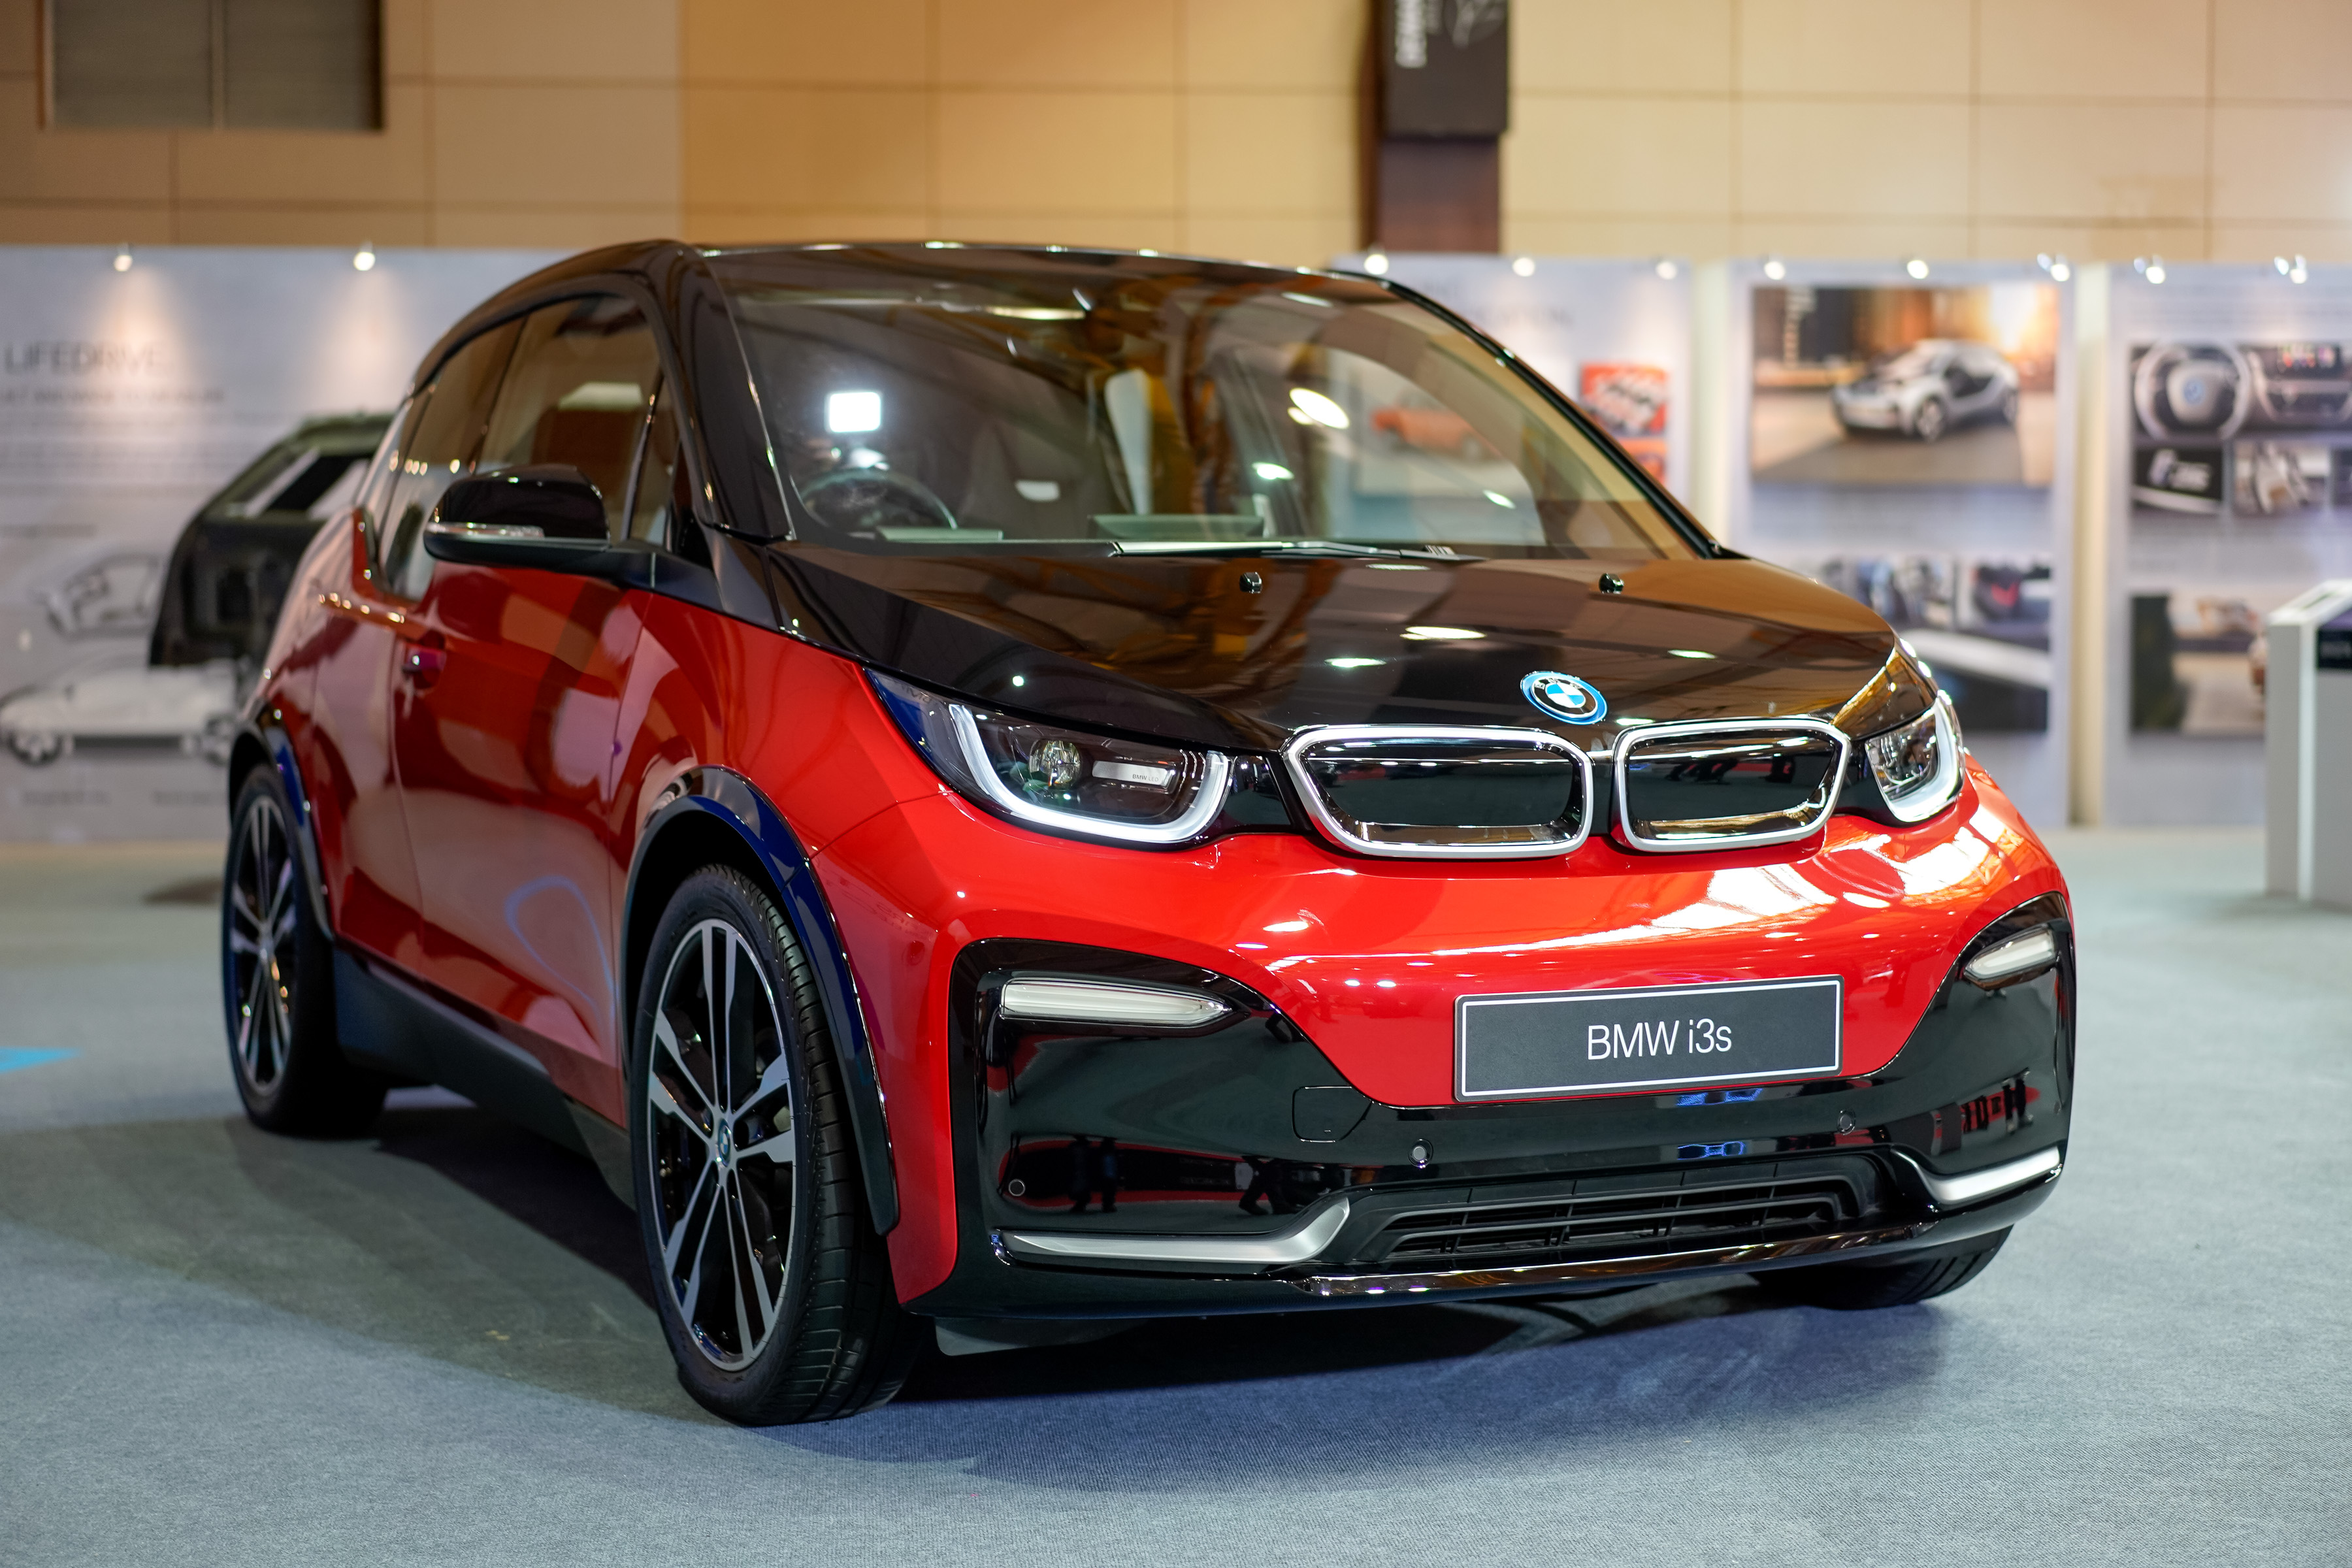 2. The First Ever Bmw I3s